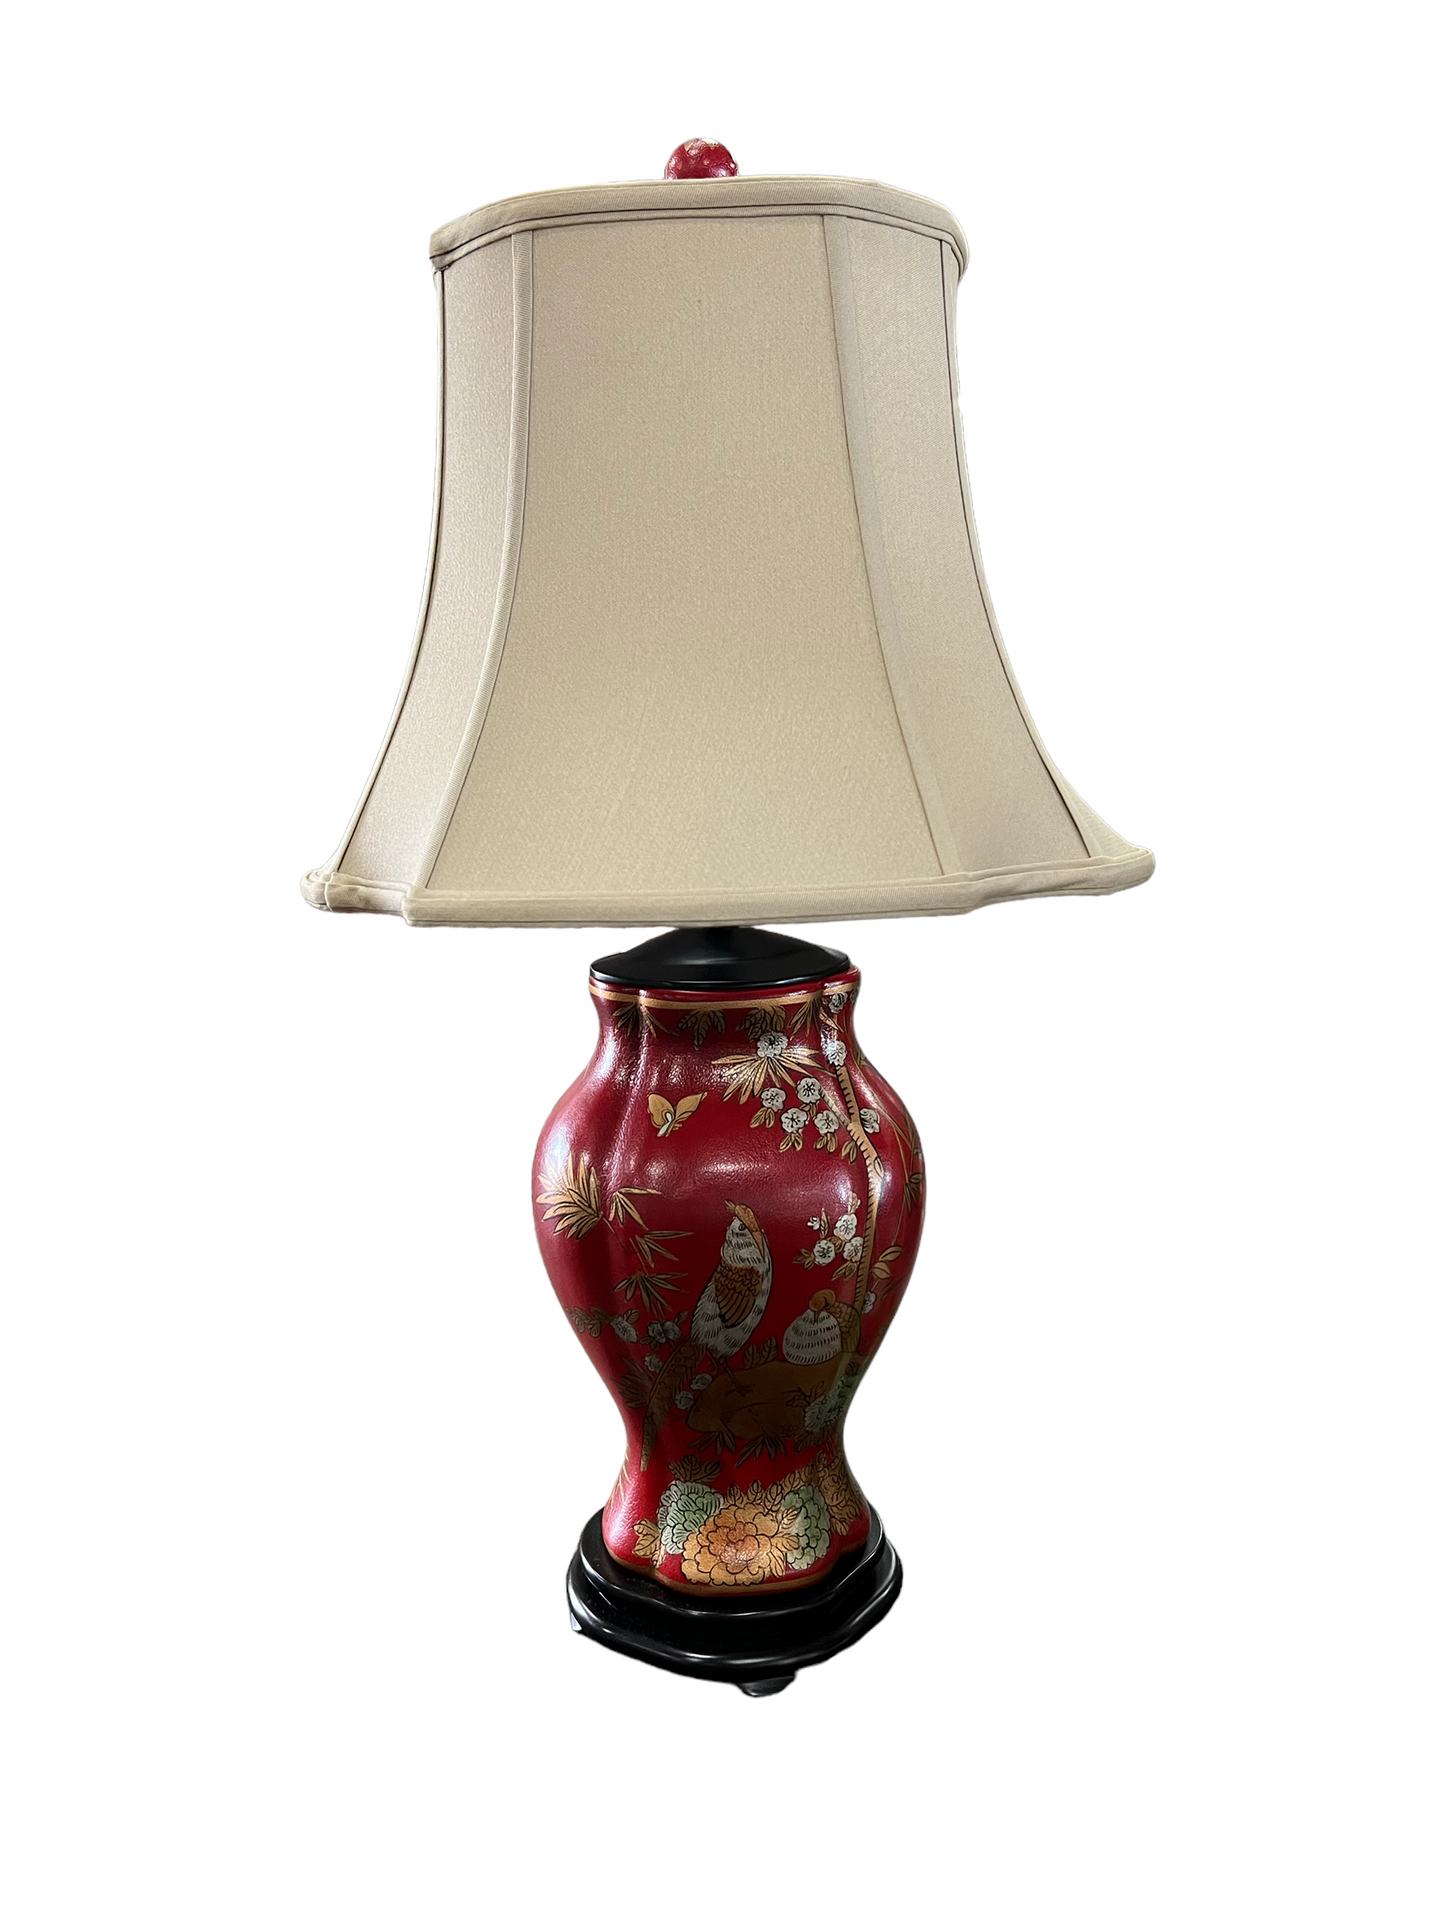 Pheasant and Flower Chinese Red Lacquer Table Lamp